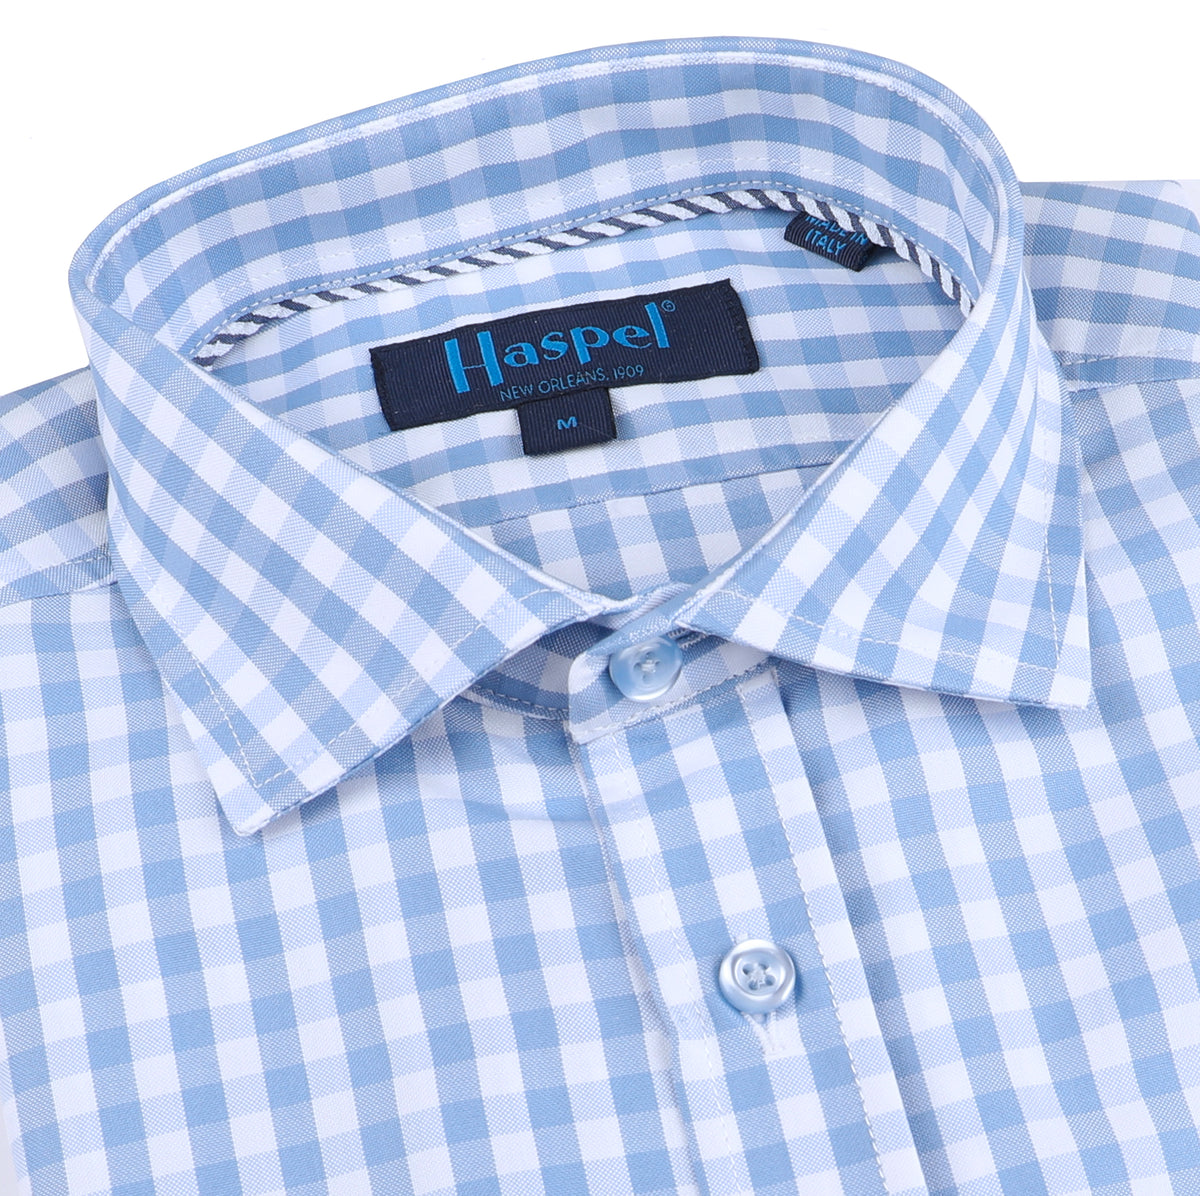 Nothing quite like a man in a blue gingham check. Calming tones and a that lightweight feel.  100% Cotton  •  Spread Collar  •  Long Sleeve  •  Chest Pocket  •  Machine Washable  •  Made in Italy